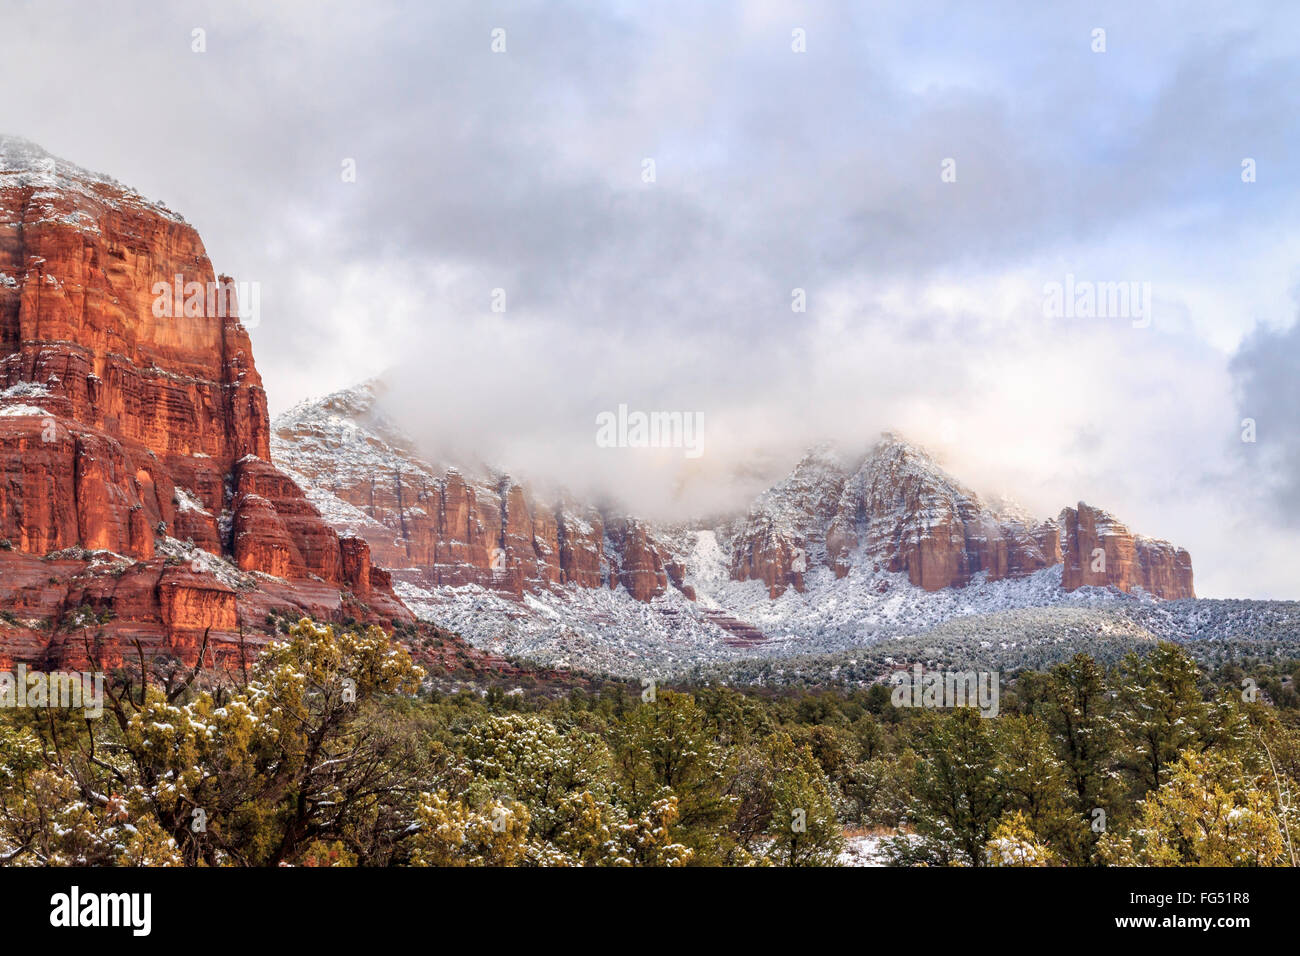 Courthouse Rock & Lee Mountain in Sedona, after a passing snowstorm. Lee Mountain still enveloped in the retreating storm clouds Stock Photo